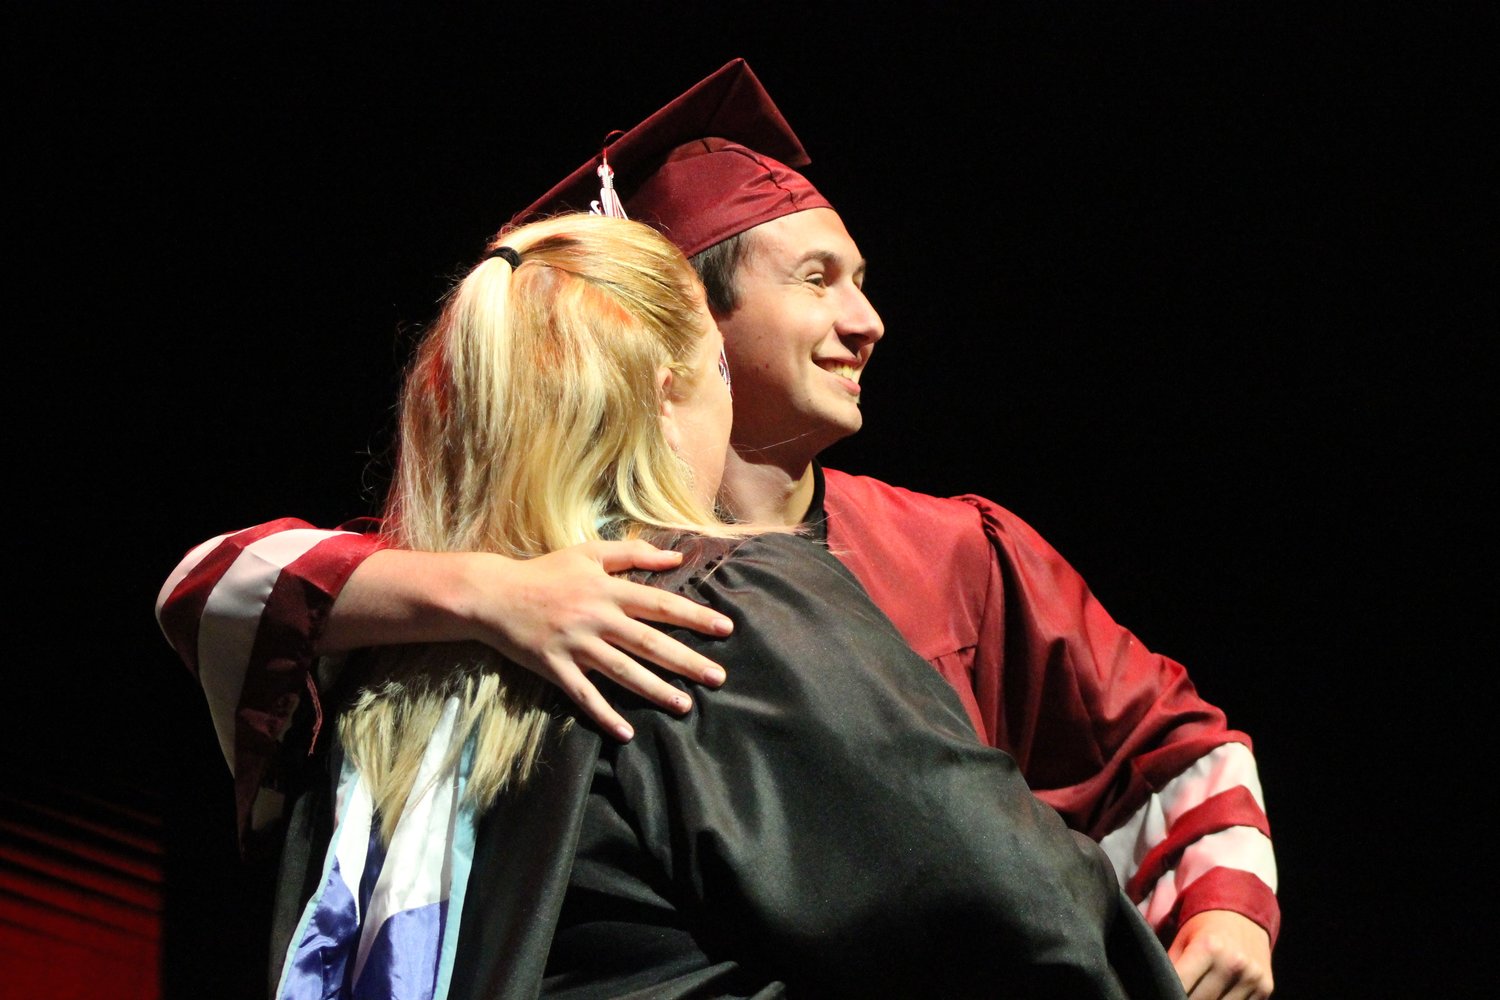 Zachary Zimmerman was thrilled to walk across the stage and celebrate his accomplishment.